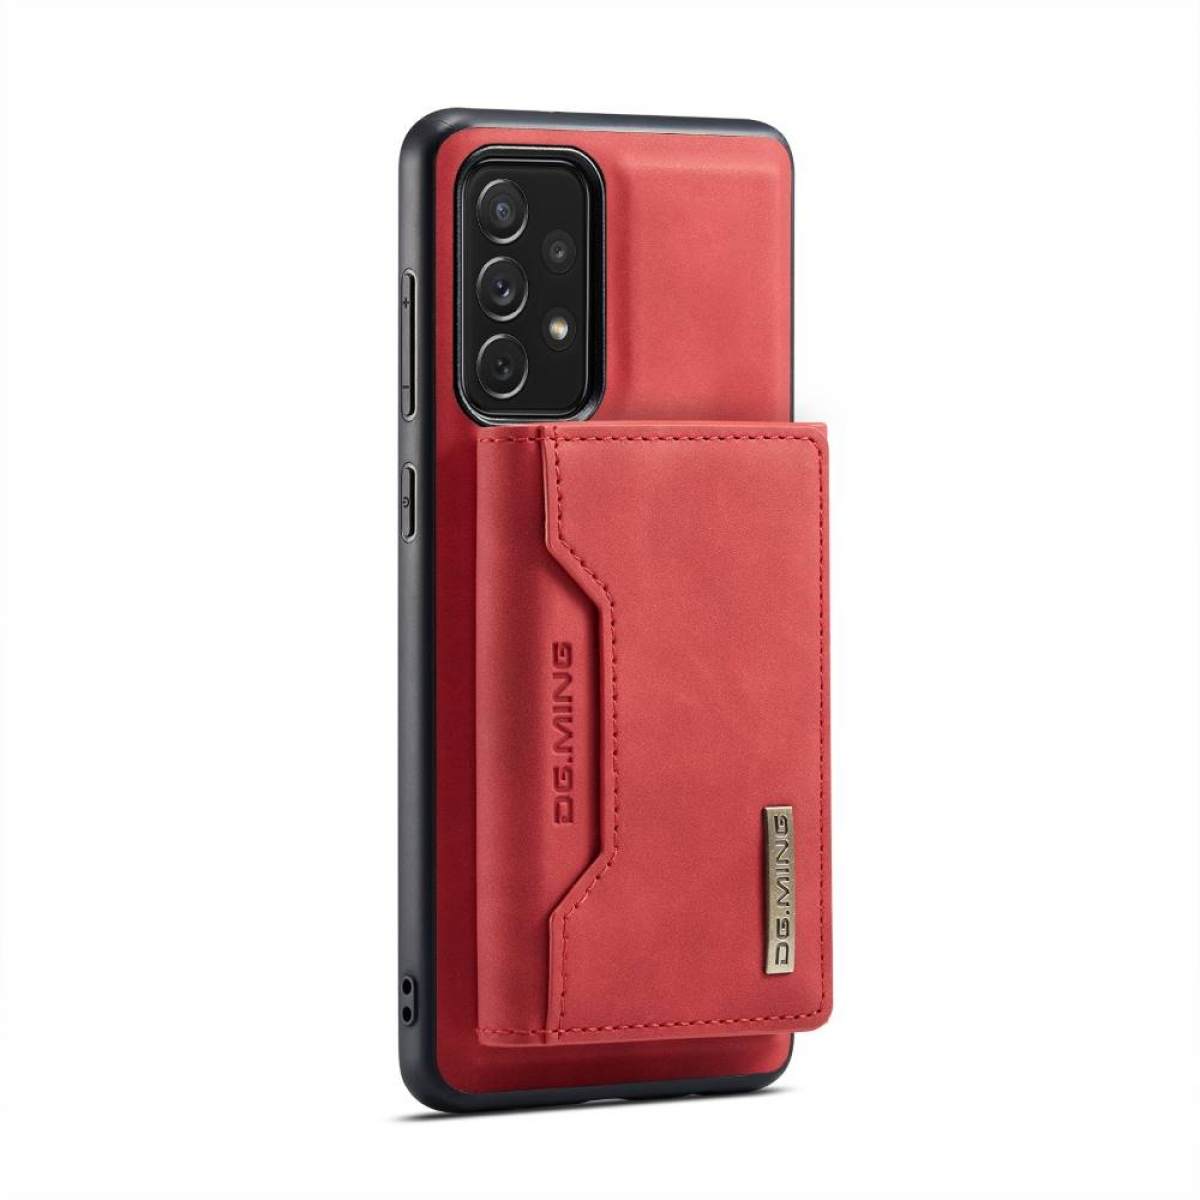 DG MING M2 2in1, Backcover, A73 Samsung, Rot 5G, Galaxy